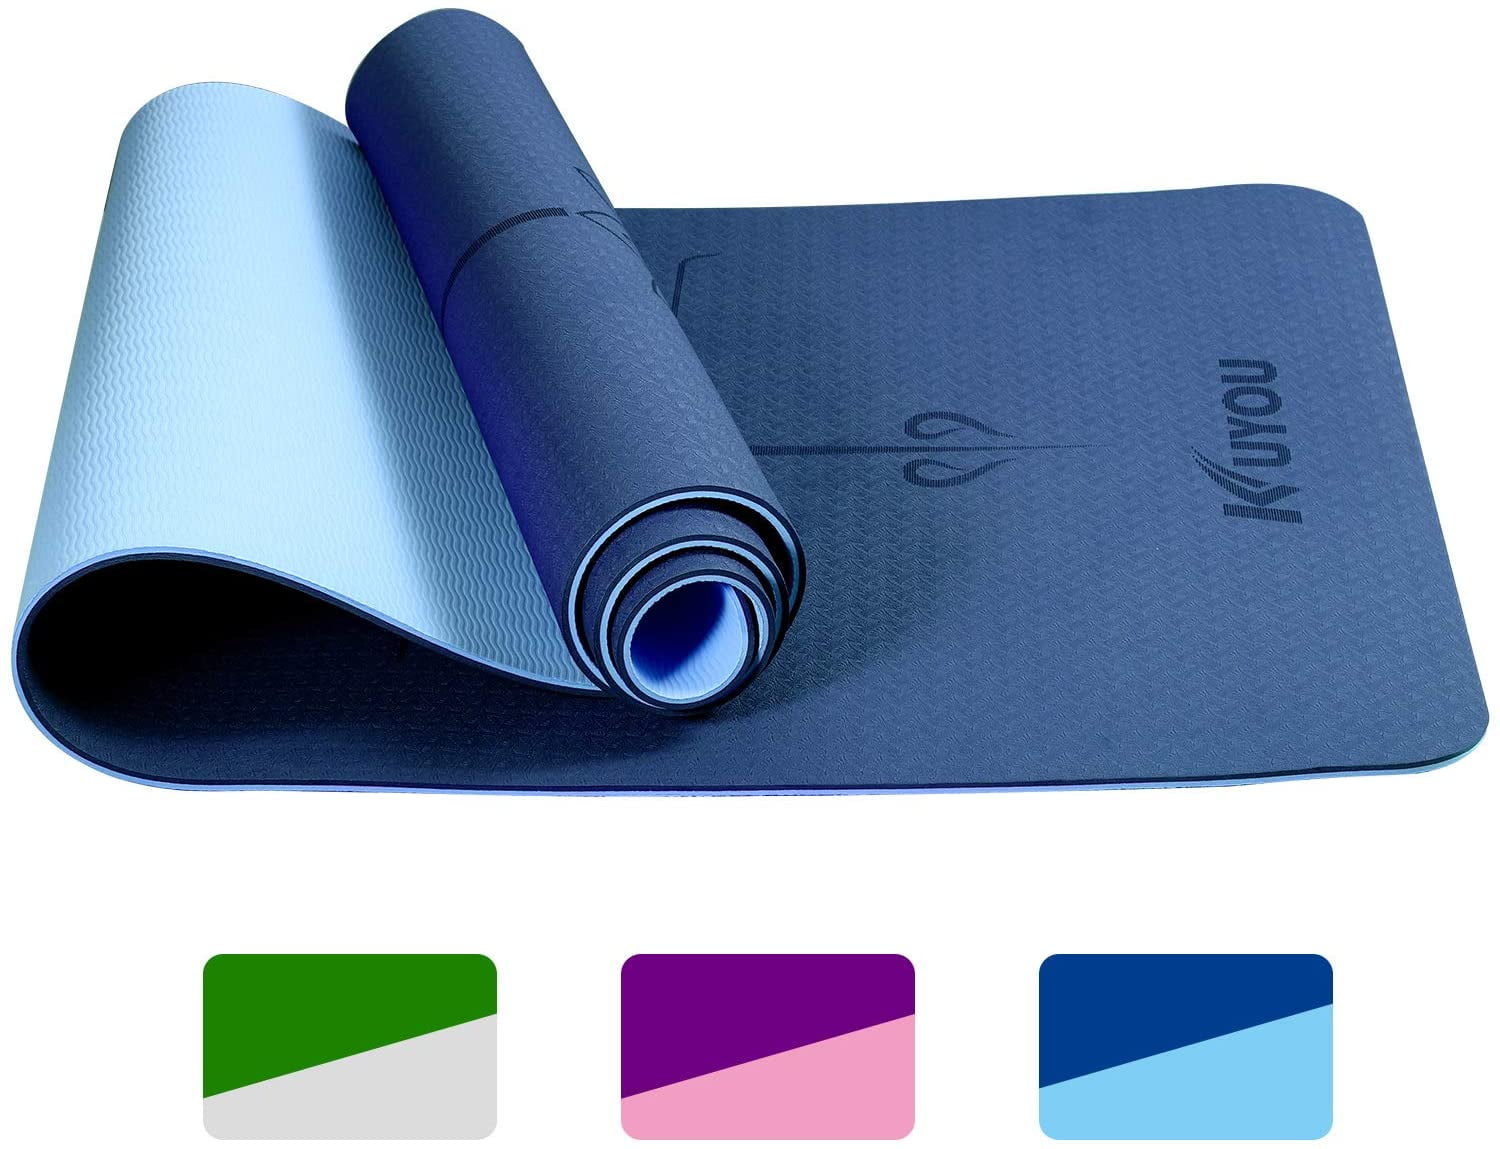 183x59x0.6cm ATIVAFIT Non Slip TPE Yoga Mat Eco Friendly Exercise & Workout Mat with Carrying Strap Types of Yoga Extra Large Exercise 